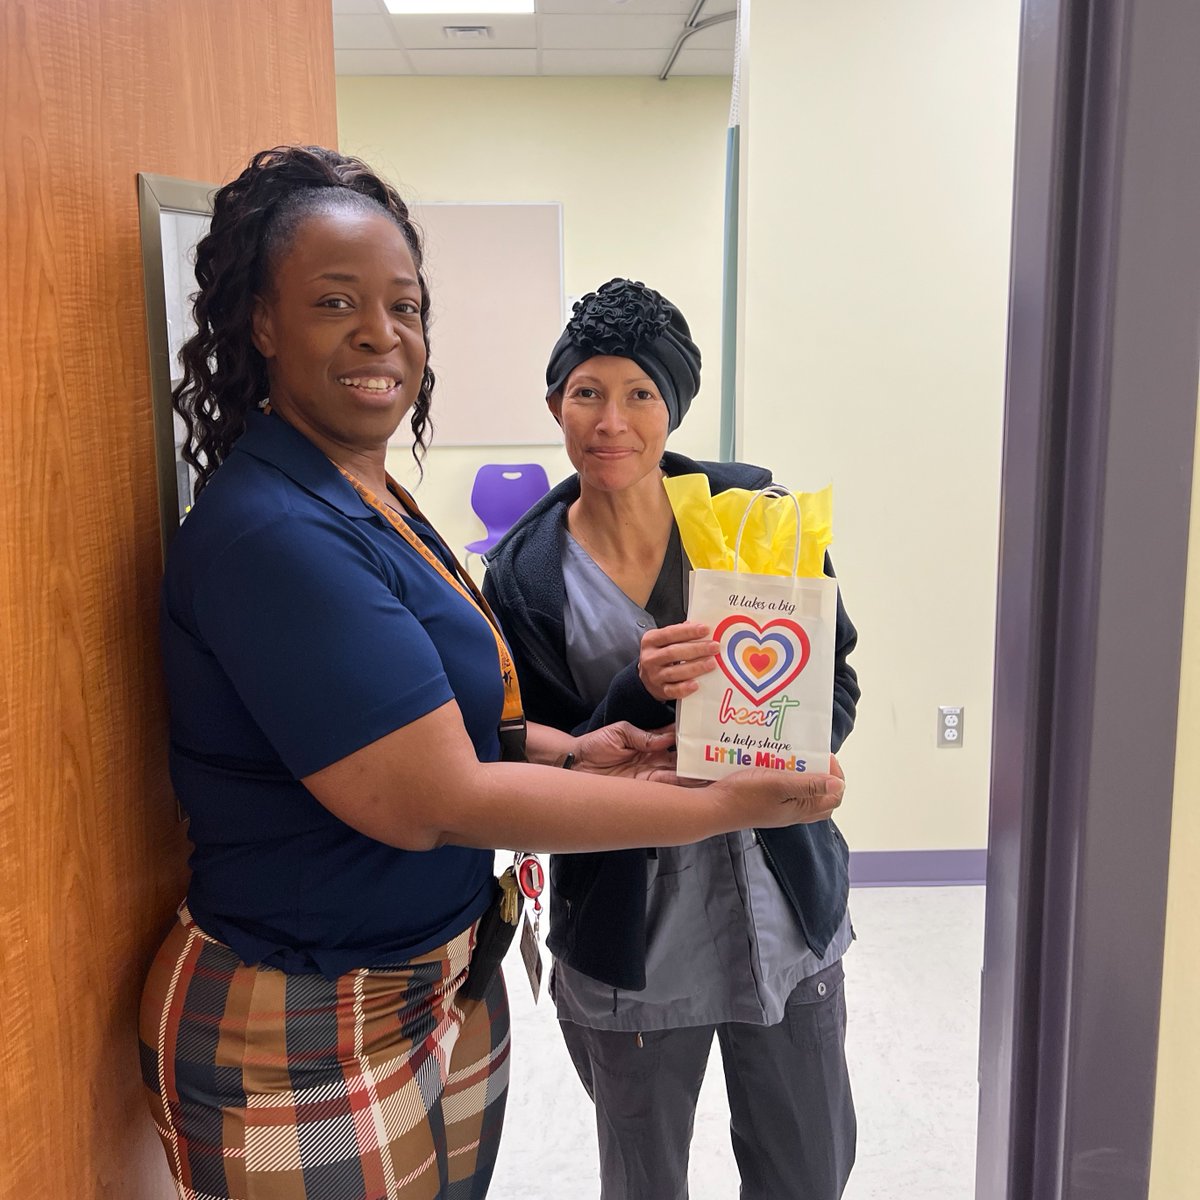 Our @HCDESchools administrators are showering educators with special tokens of gratitude for Teacher Appreciation Week. #TeamHCDE shared laughs and smiles as they received gift bags filled with snacks, HCDE merchandise and more. #SeetheImpact @clwaters18